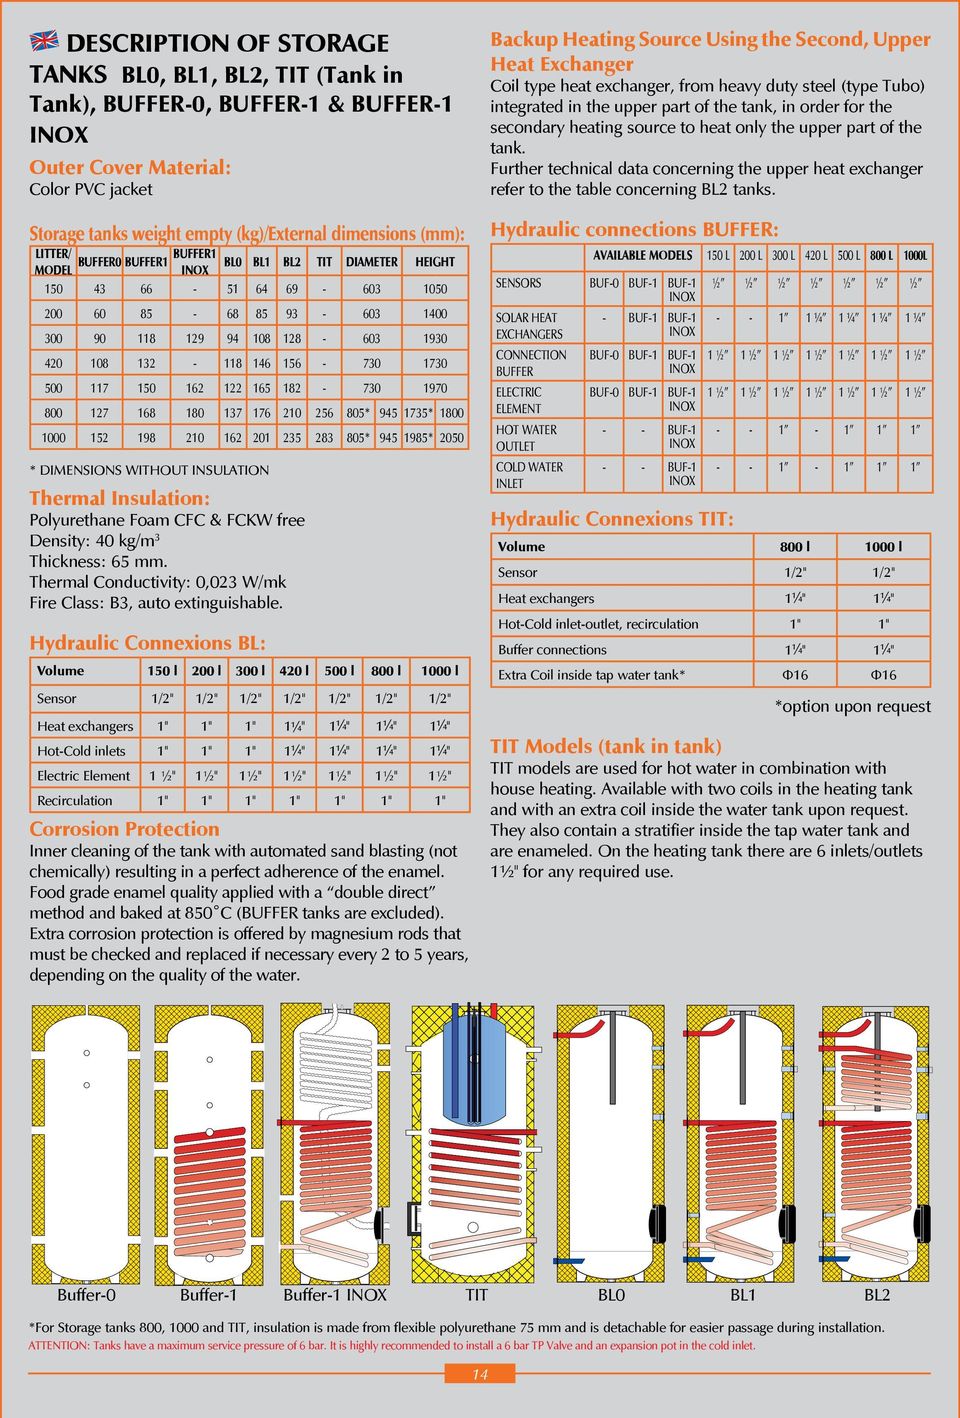 Further technical data concerning the upper heat exchanger refer to the table concerning BL2 tanks.